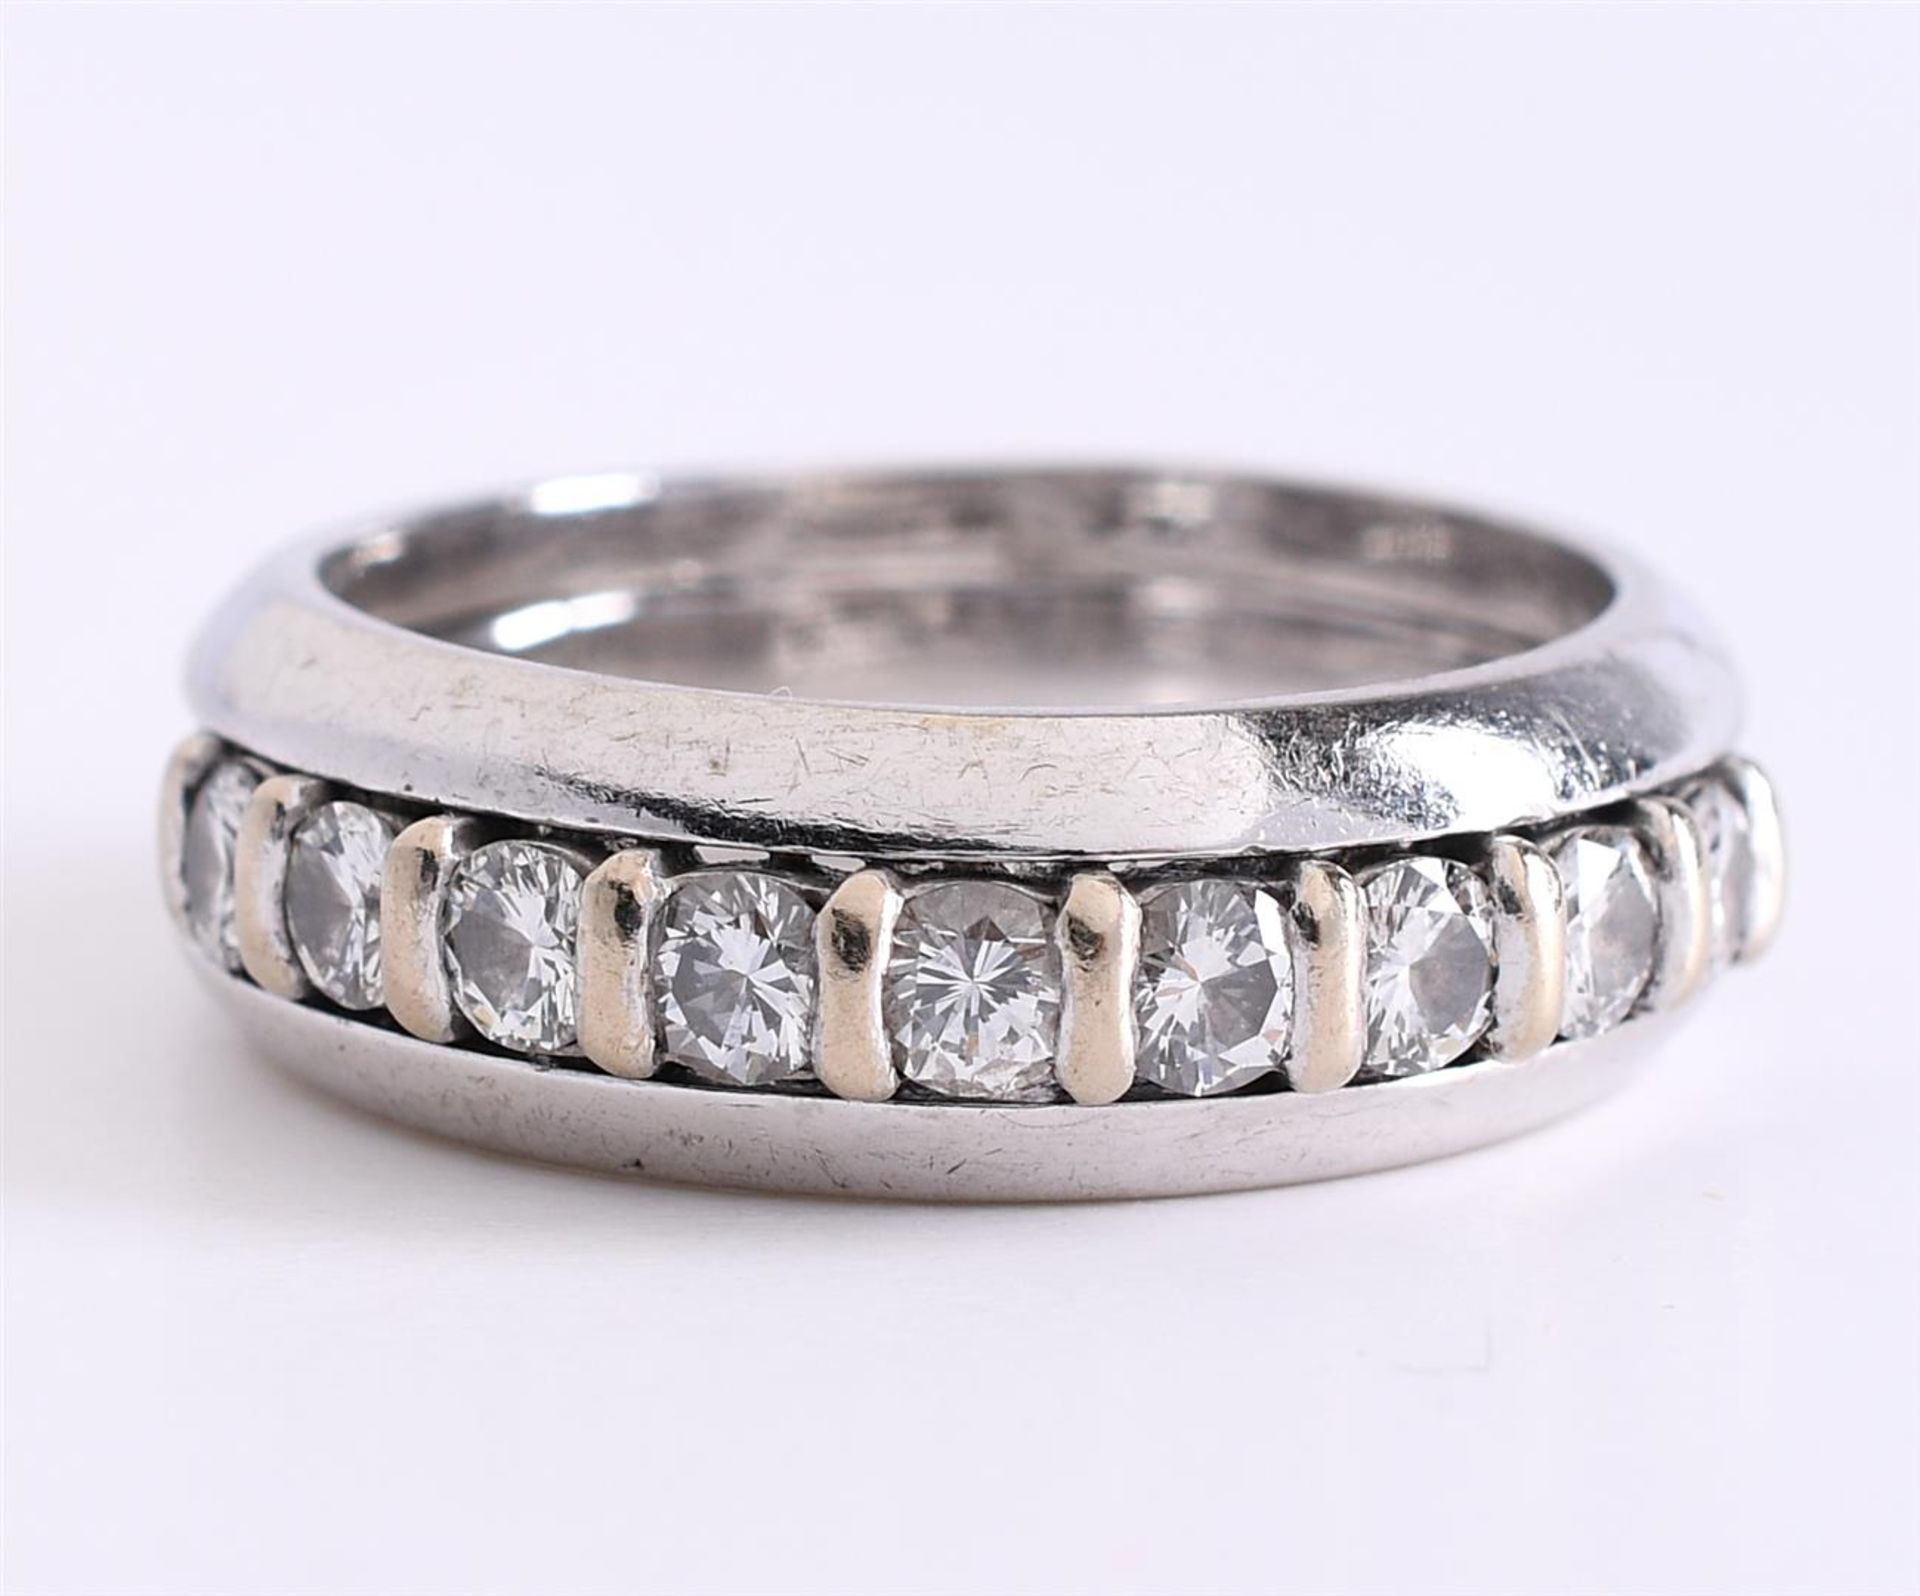 14/18 carat white gold wide row ring set with 9 brilliant cut diamonds of approx. 0.08 ct